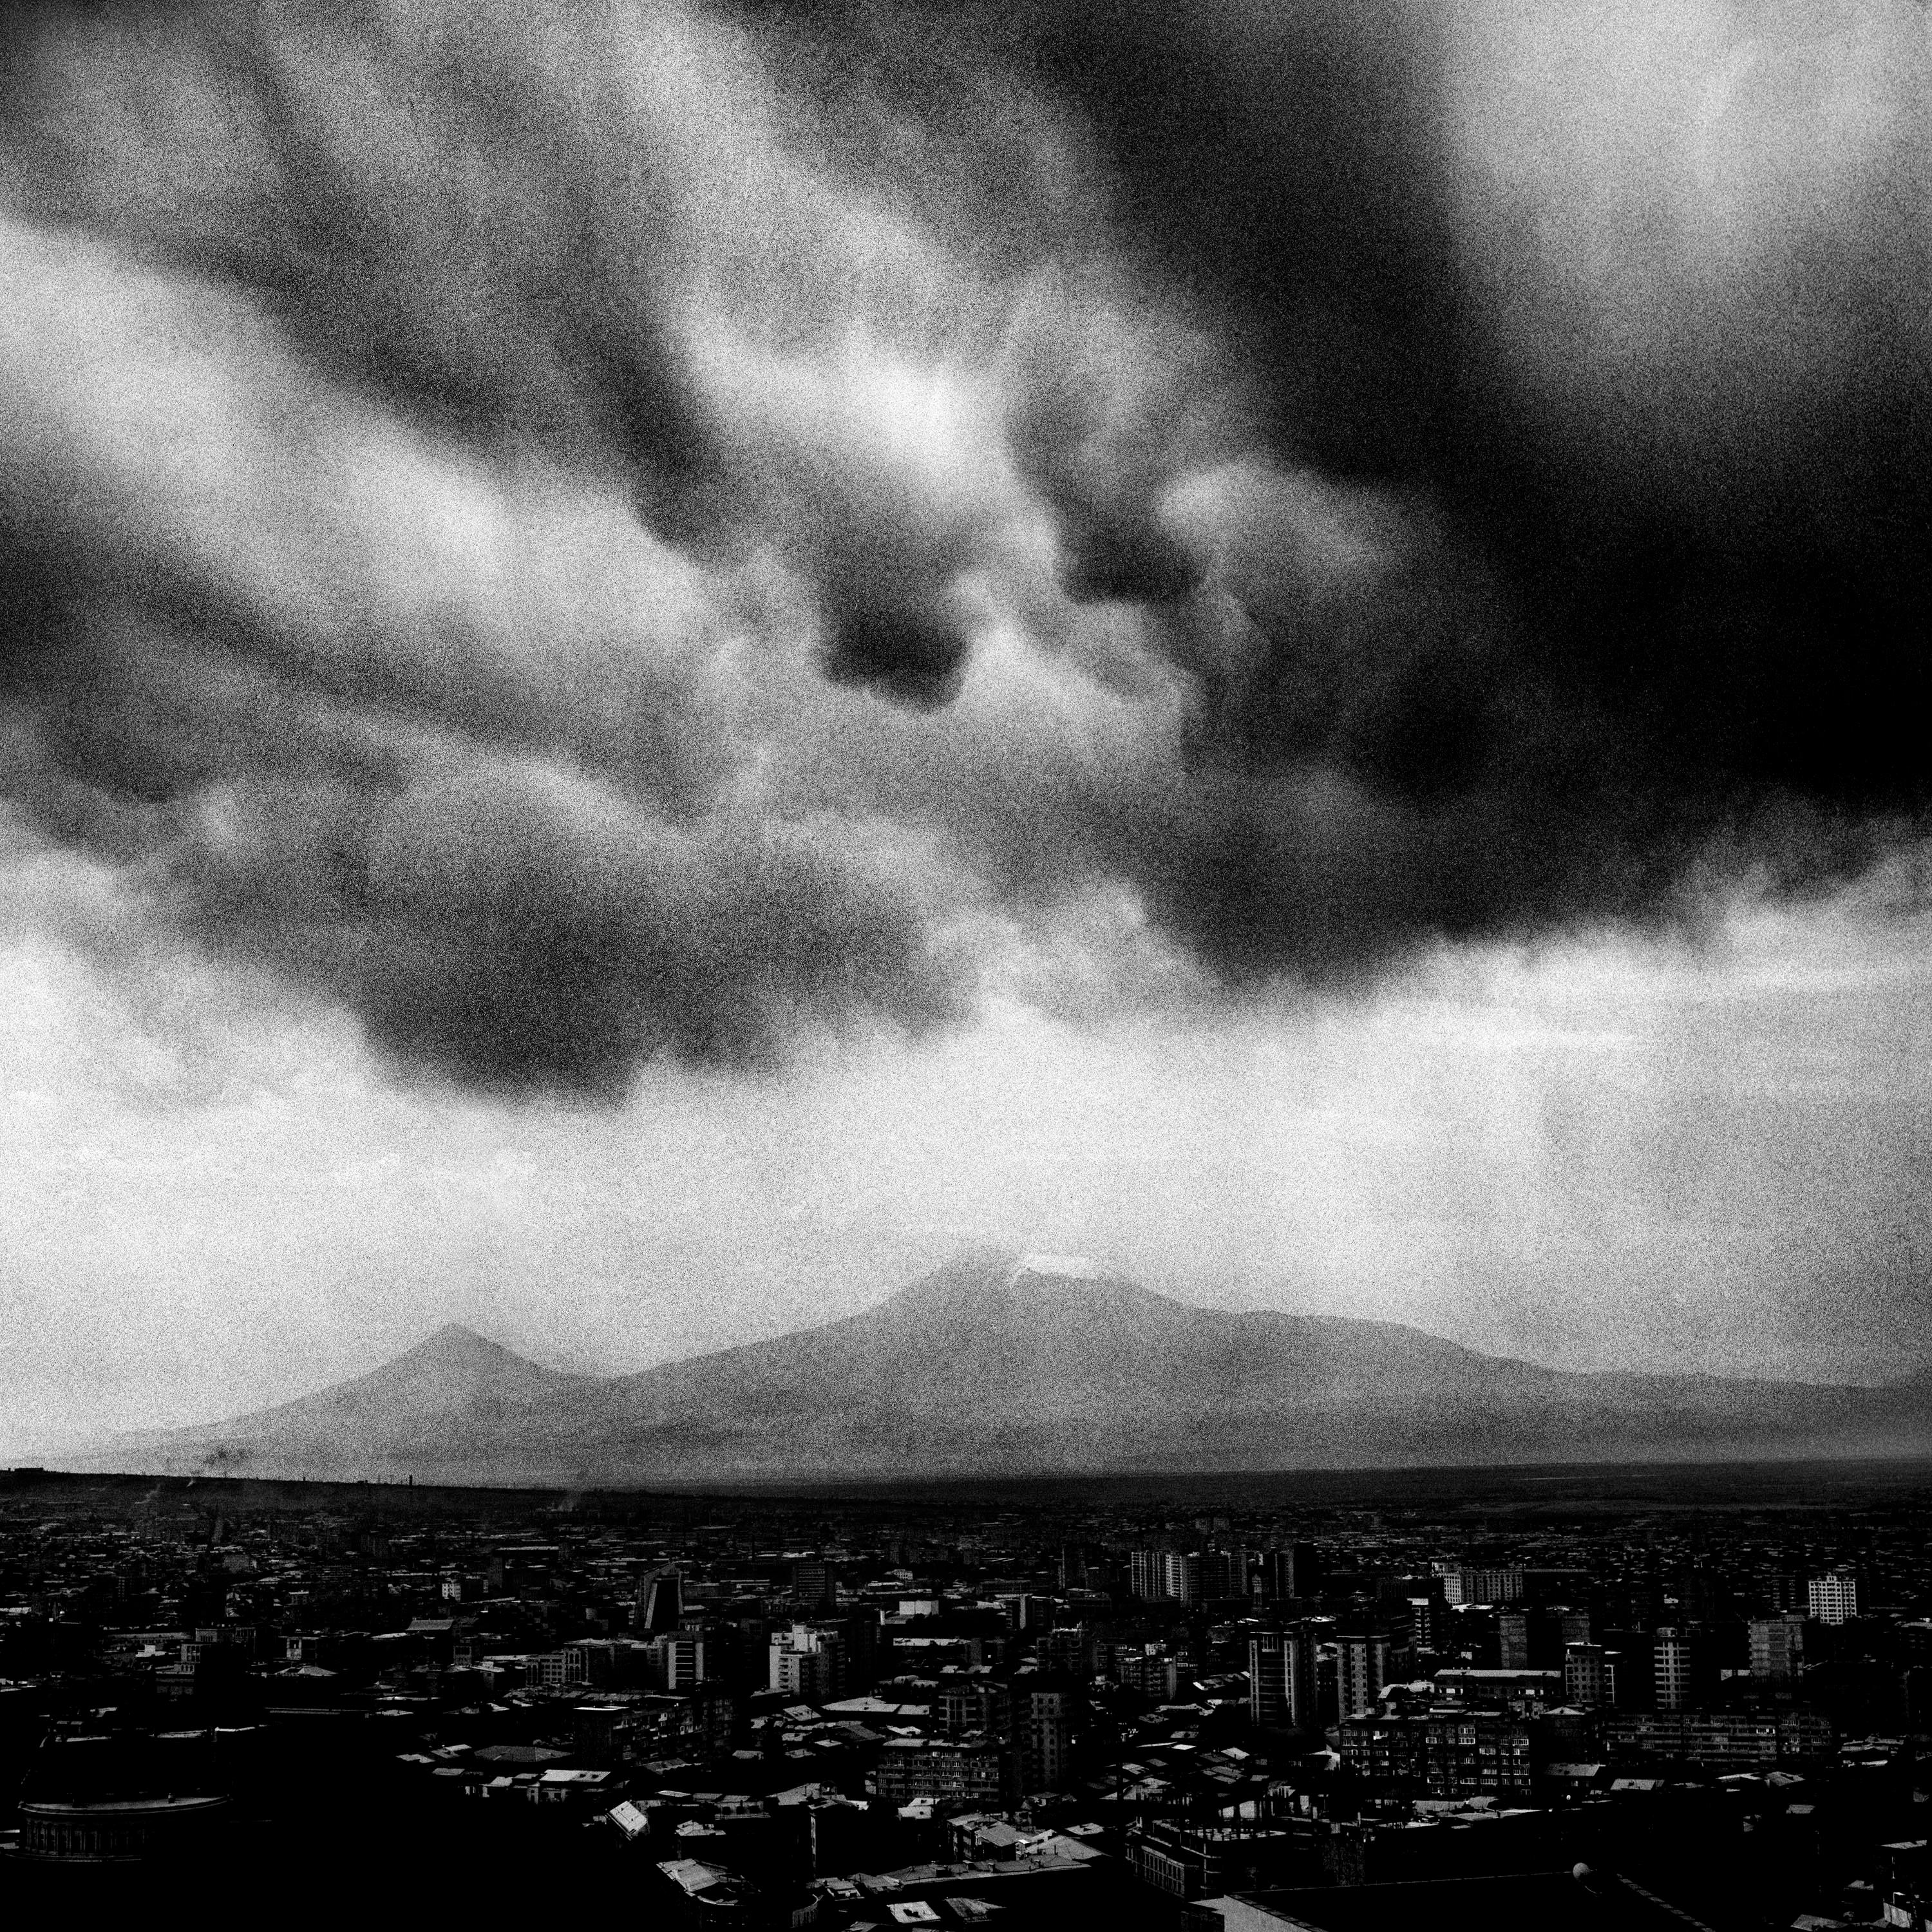 Storm Over Yerevan-Black and white photo of Ararat Mountain and cityscape